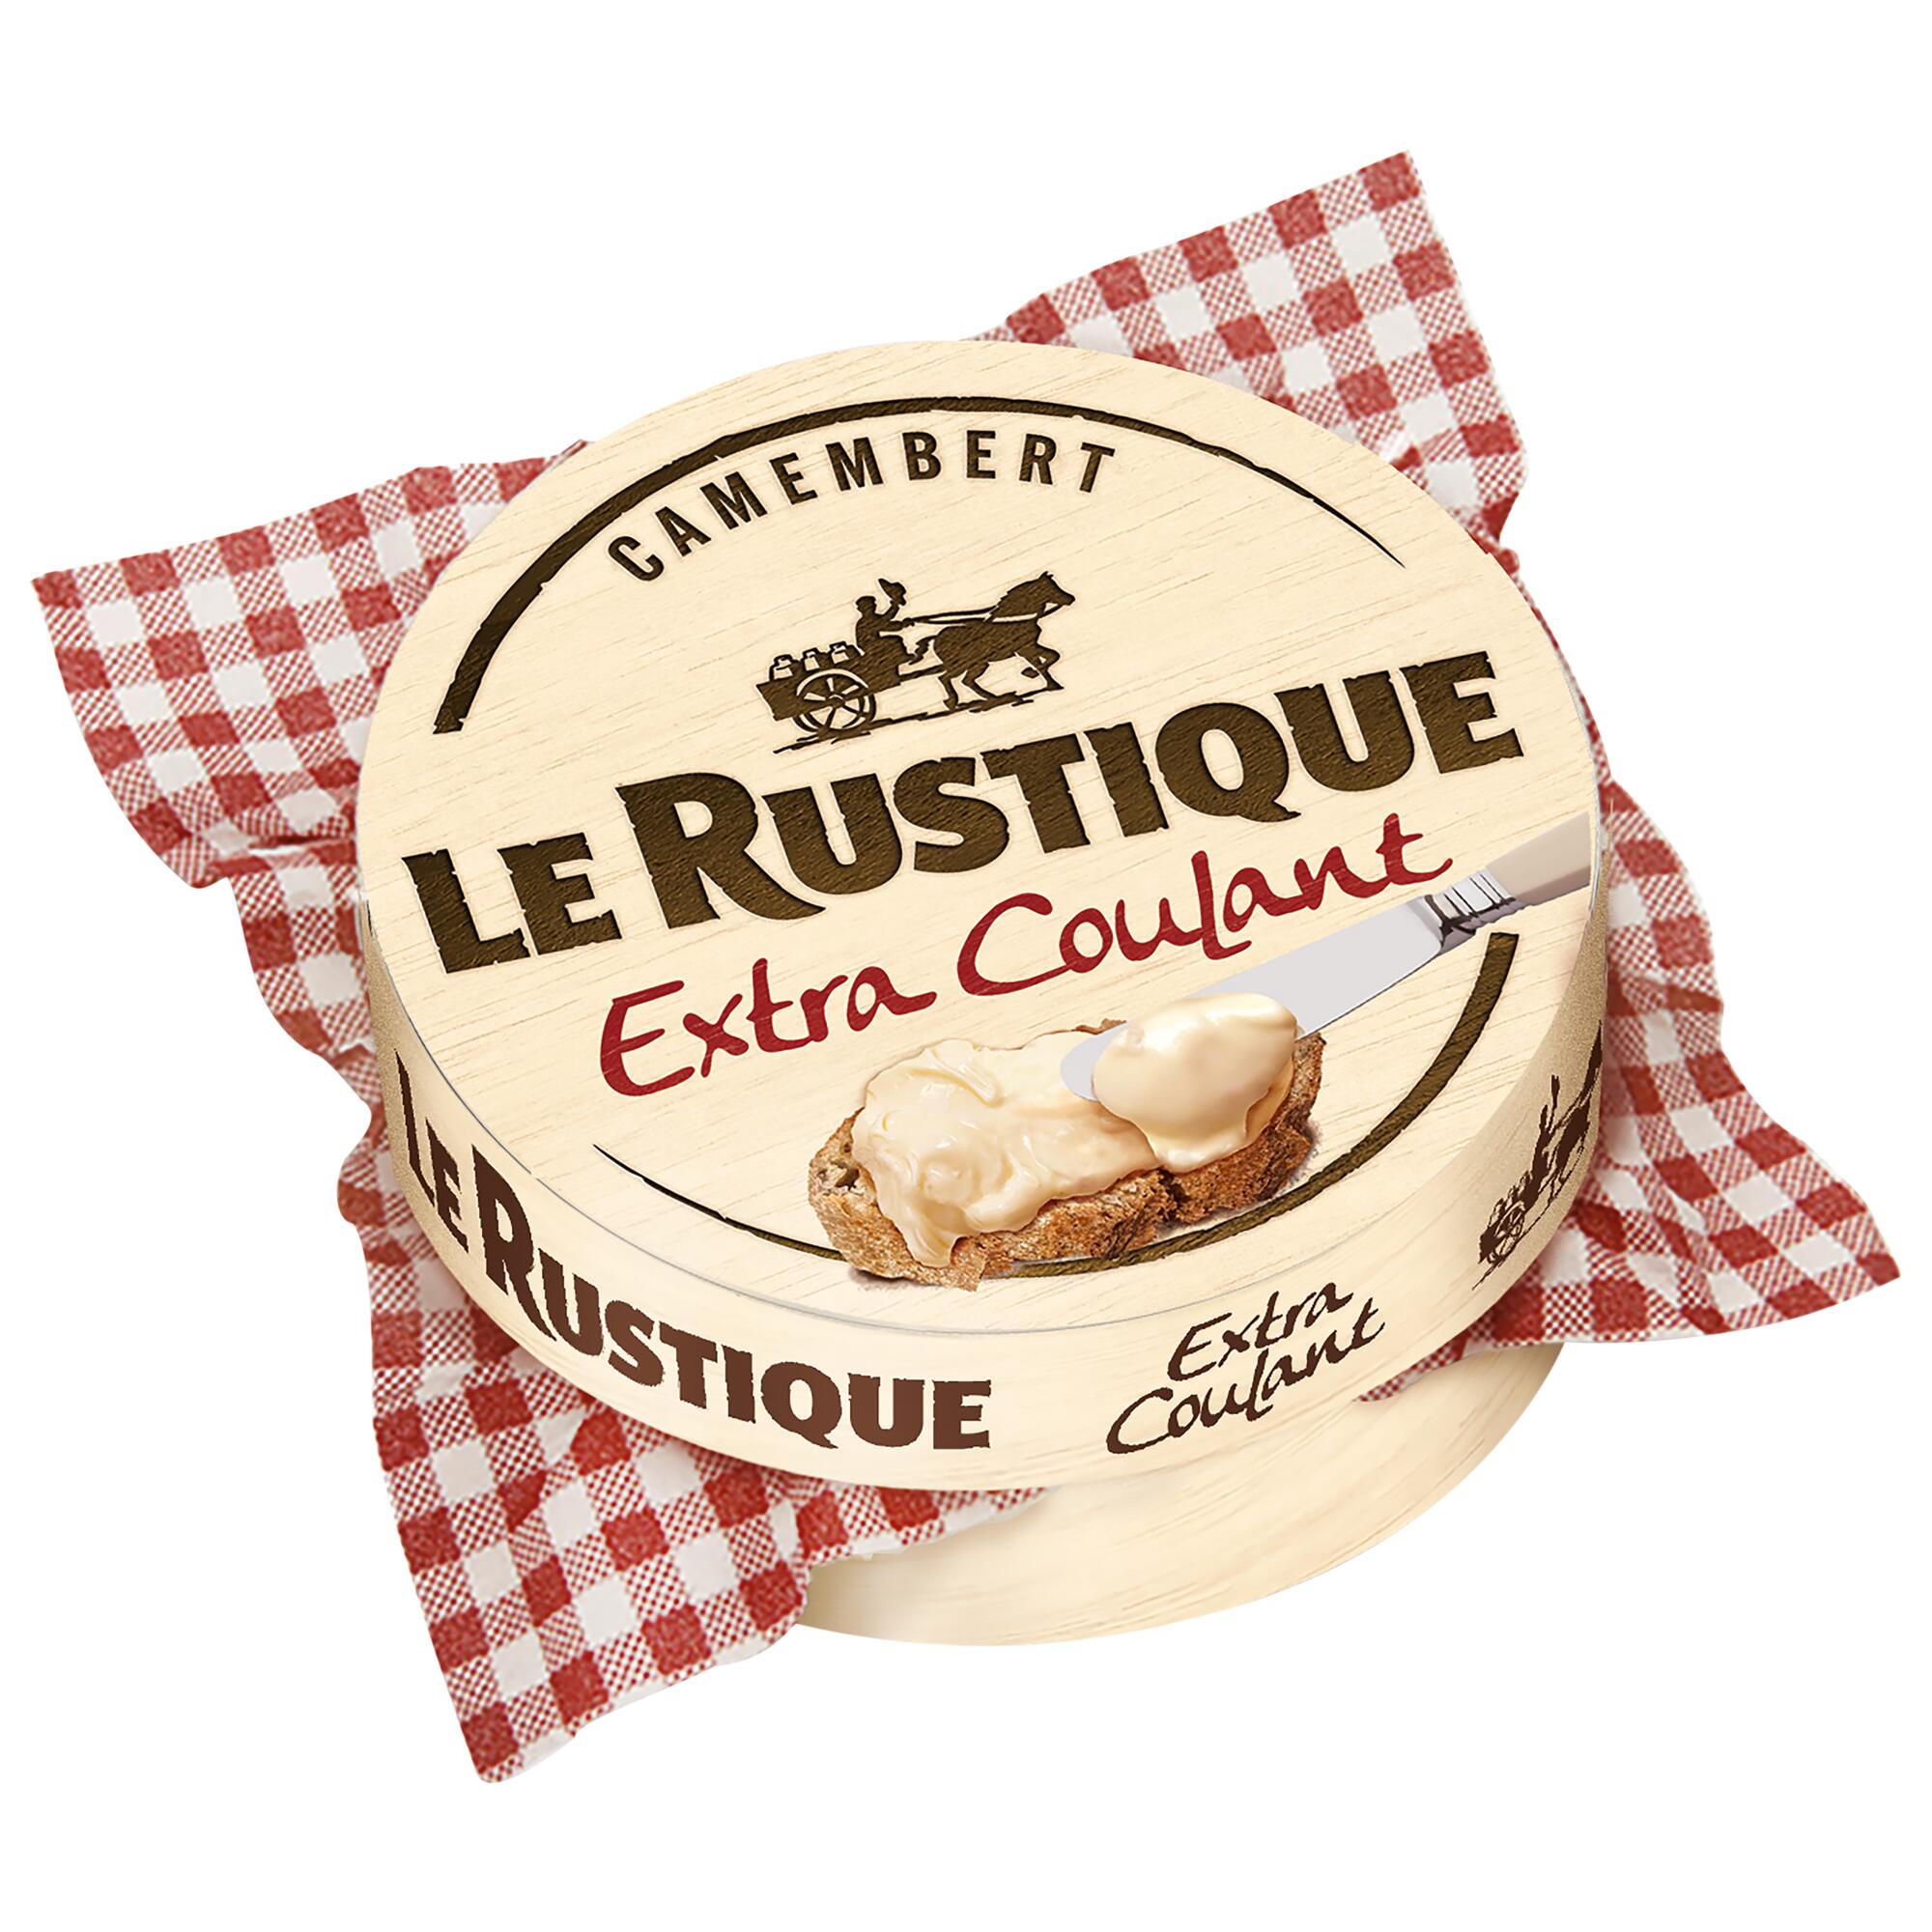 Le Rustique Camembert Extra Coulant 240g